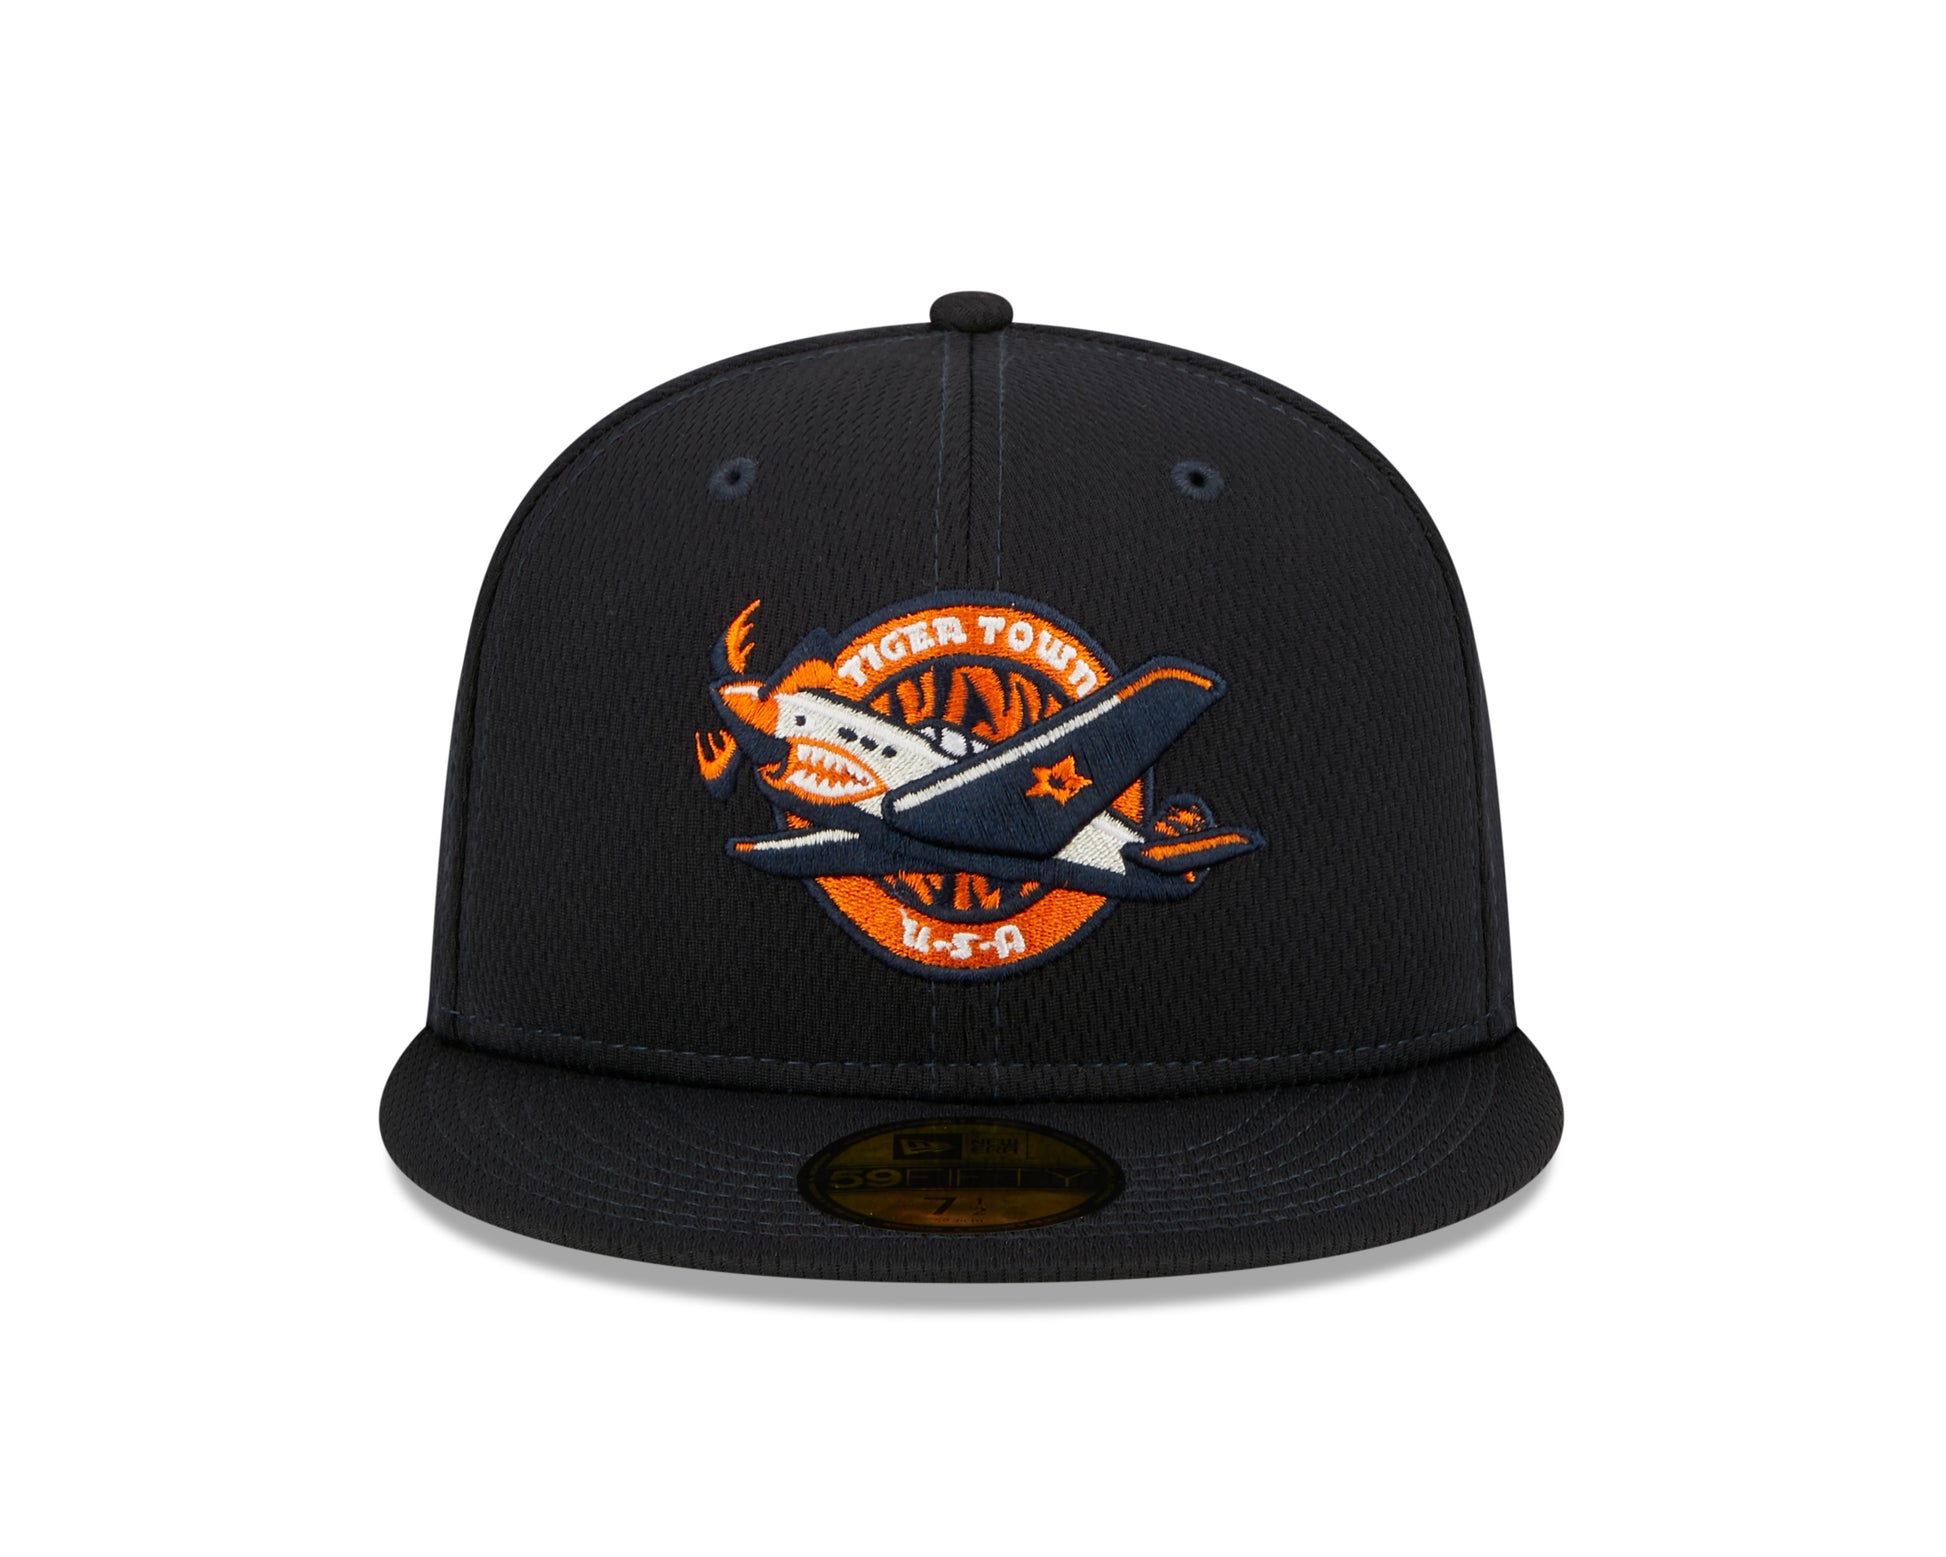 New Era - 59fifty Fitted - MiLB - AC Perf - Lakeland Tigers - Navy - Headz Up 